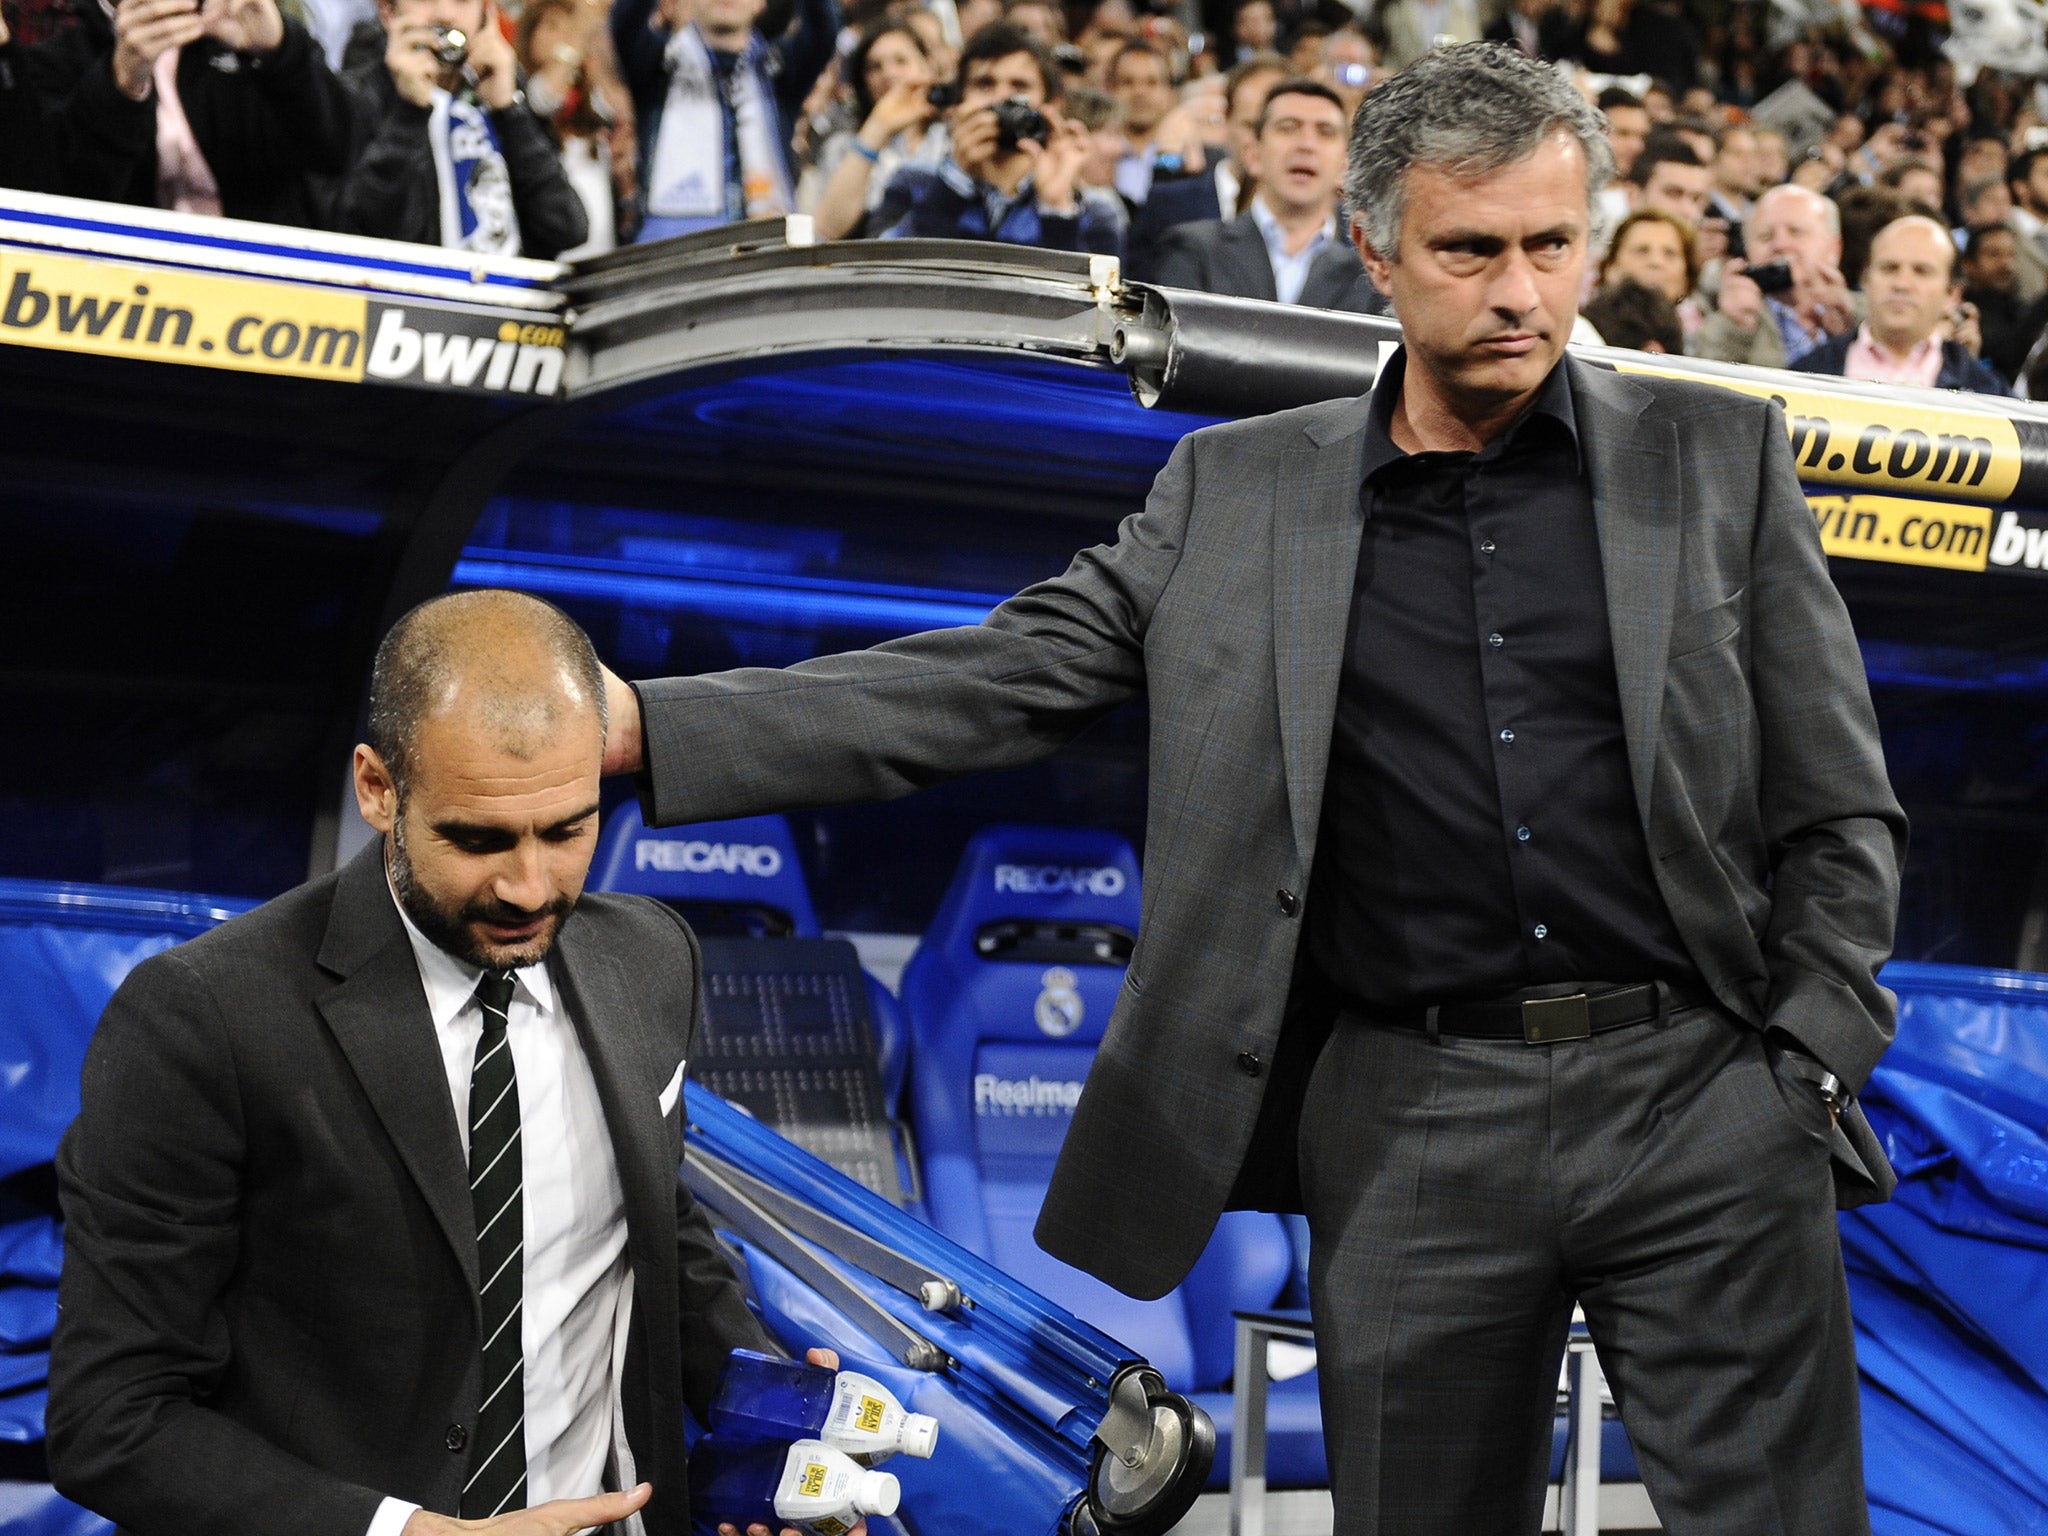 Pep Guardiola and Jose Mourinho have a long and bitter rivalry